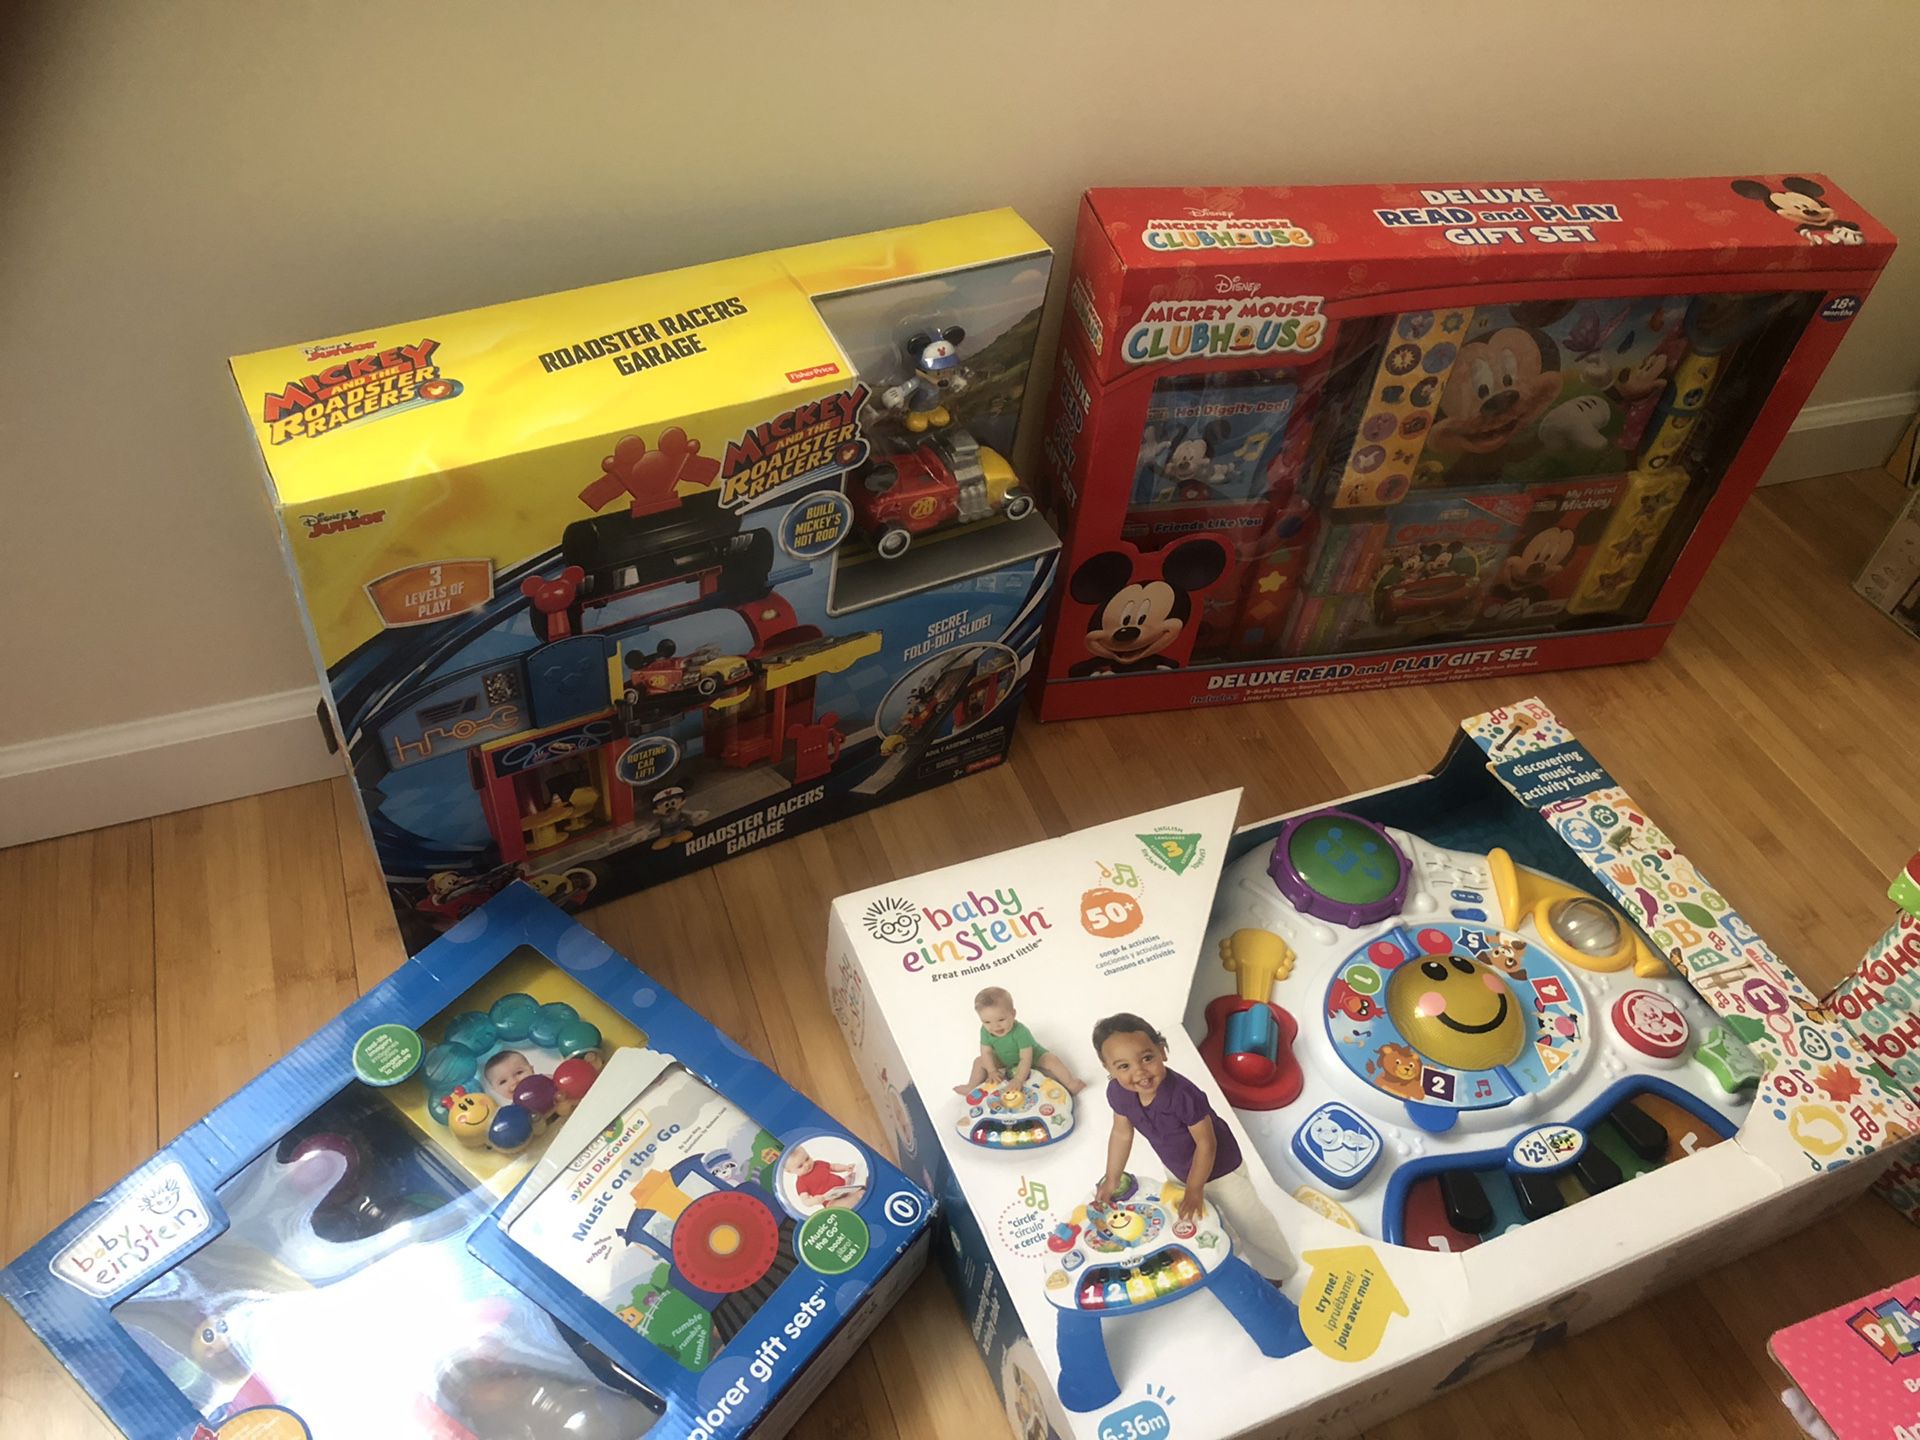 Baby and toddler toys